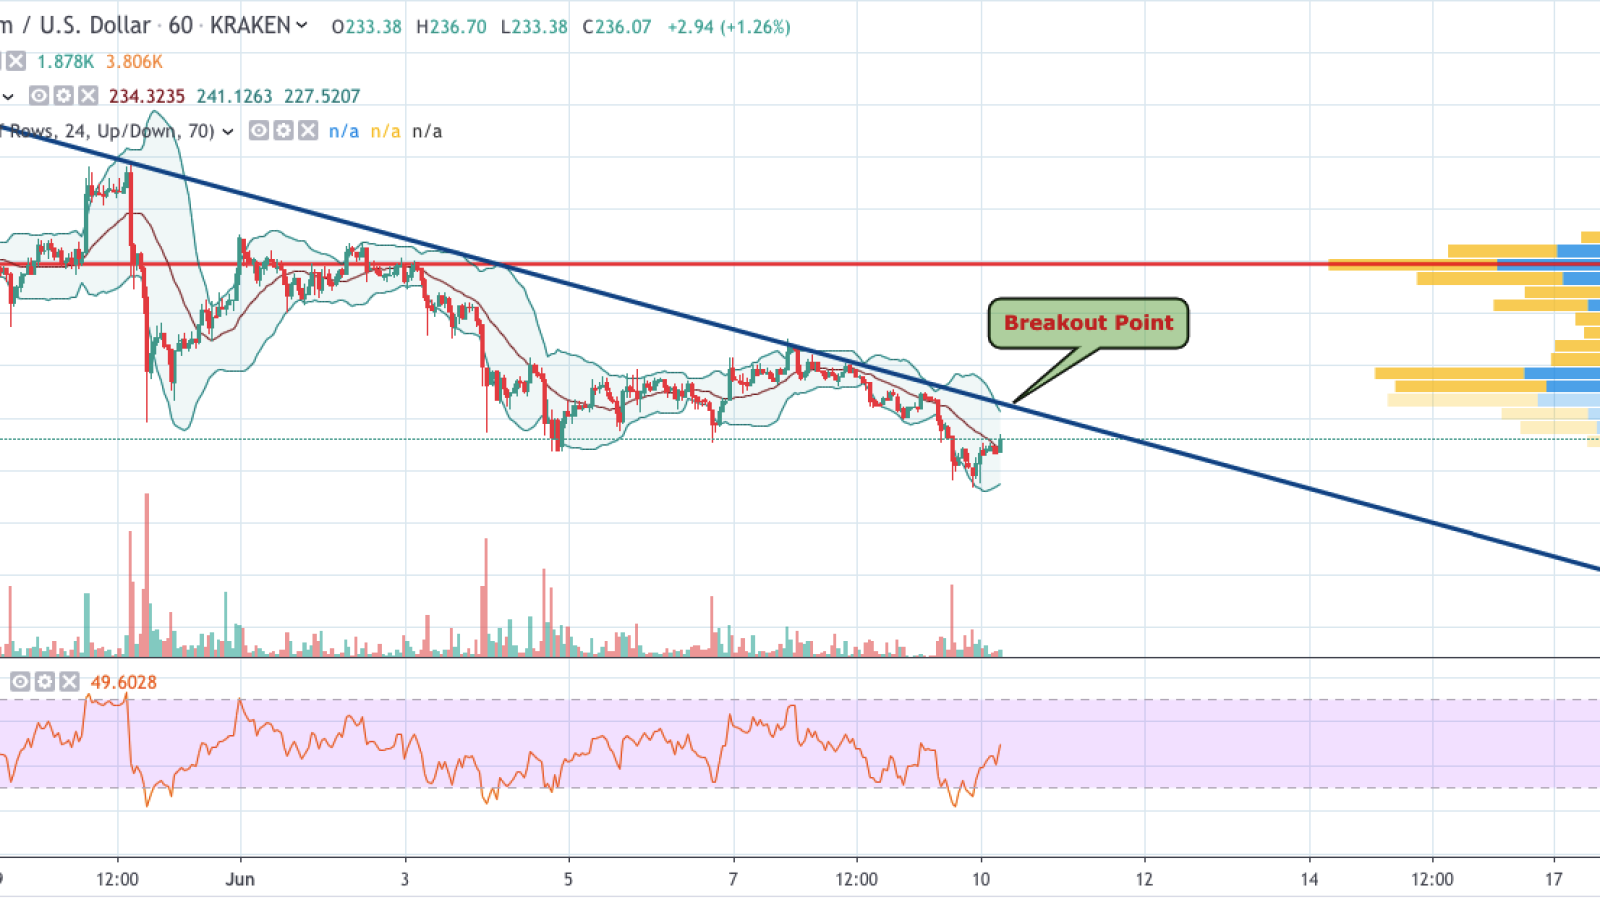 ETH/USD chart by TradingView